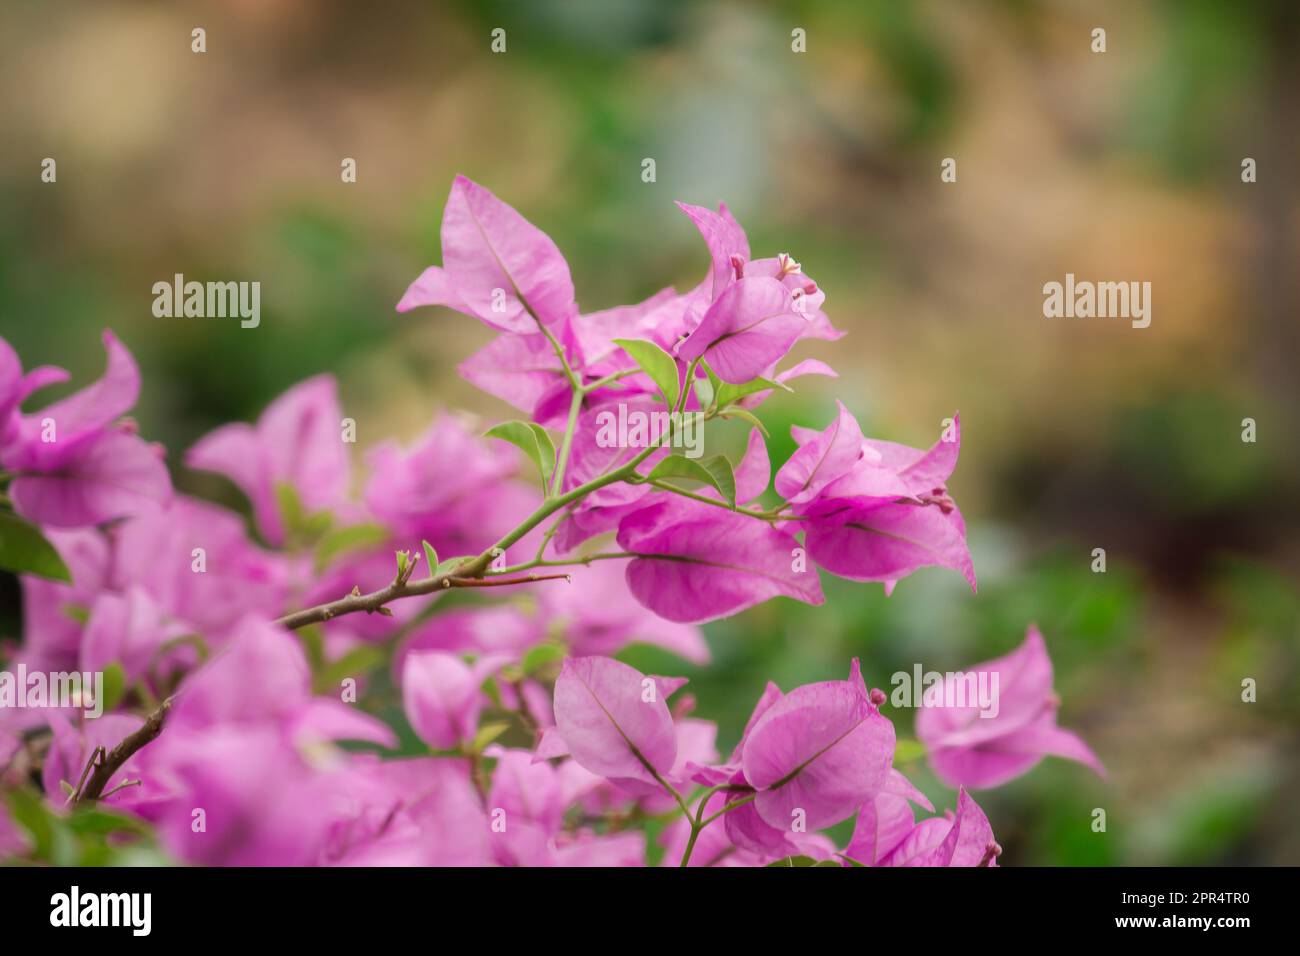 Bougainvillea, pink, bouquet of flowers, axillary or branch Each bouquet has 3 flowers. It is a perennial shrub type. Stock Photo